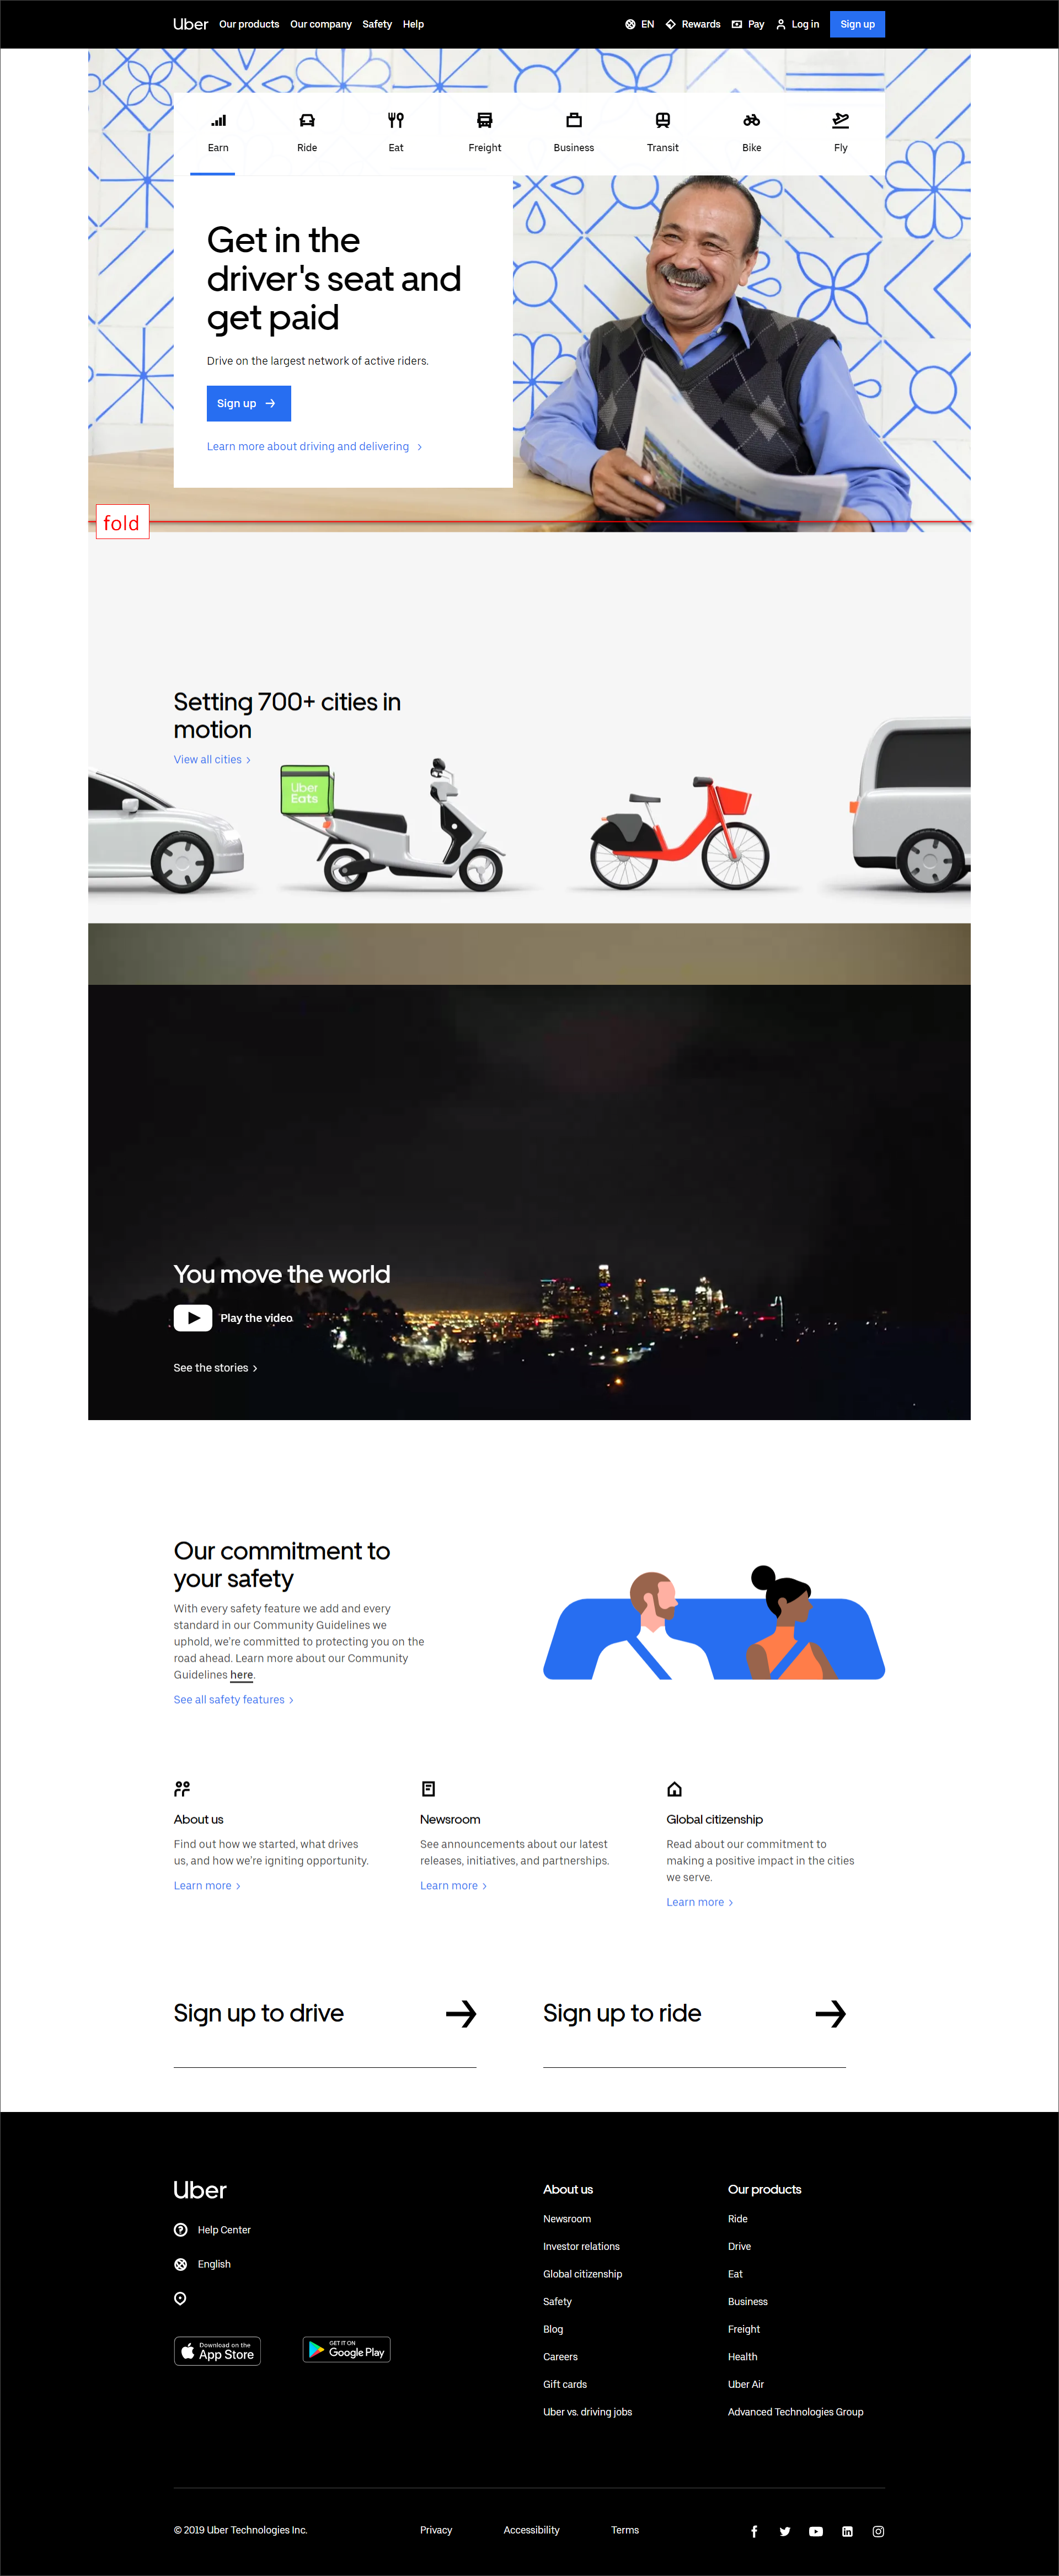 Uber.com: Example of good homepage design - distinct user tasks, pathway for early stage visitors